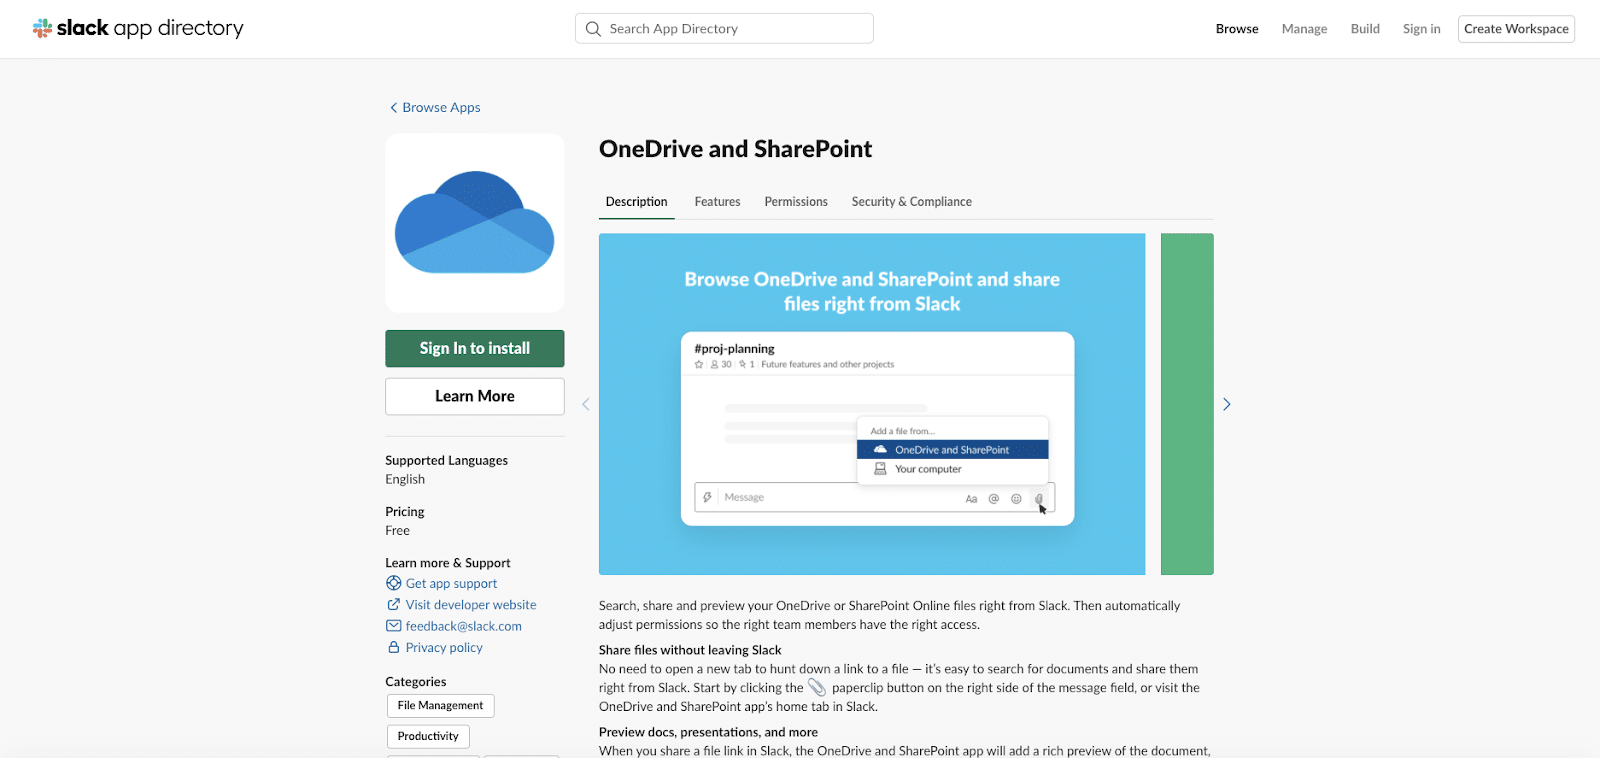 OneDrive and Sharepoint app for Slack